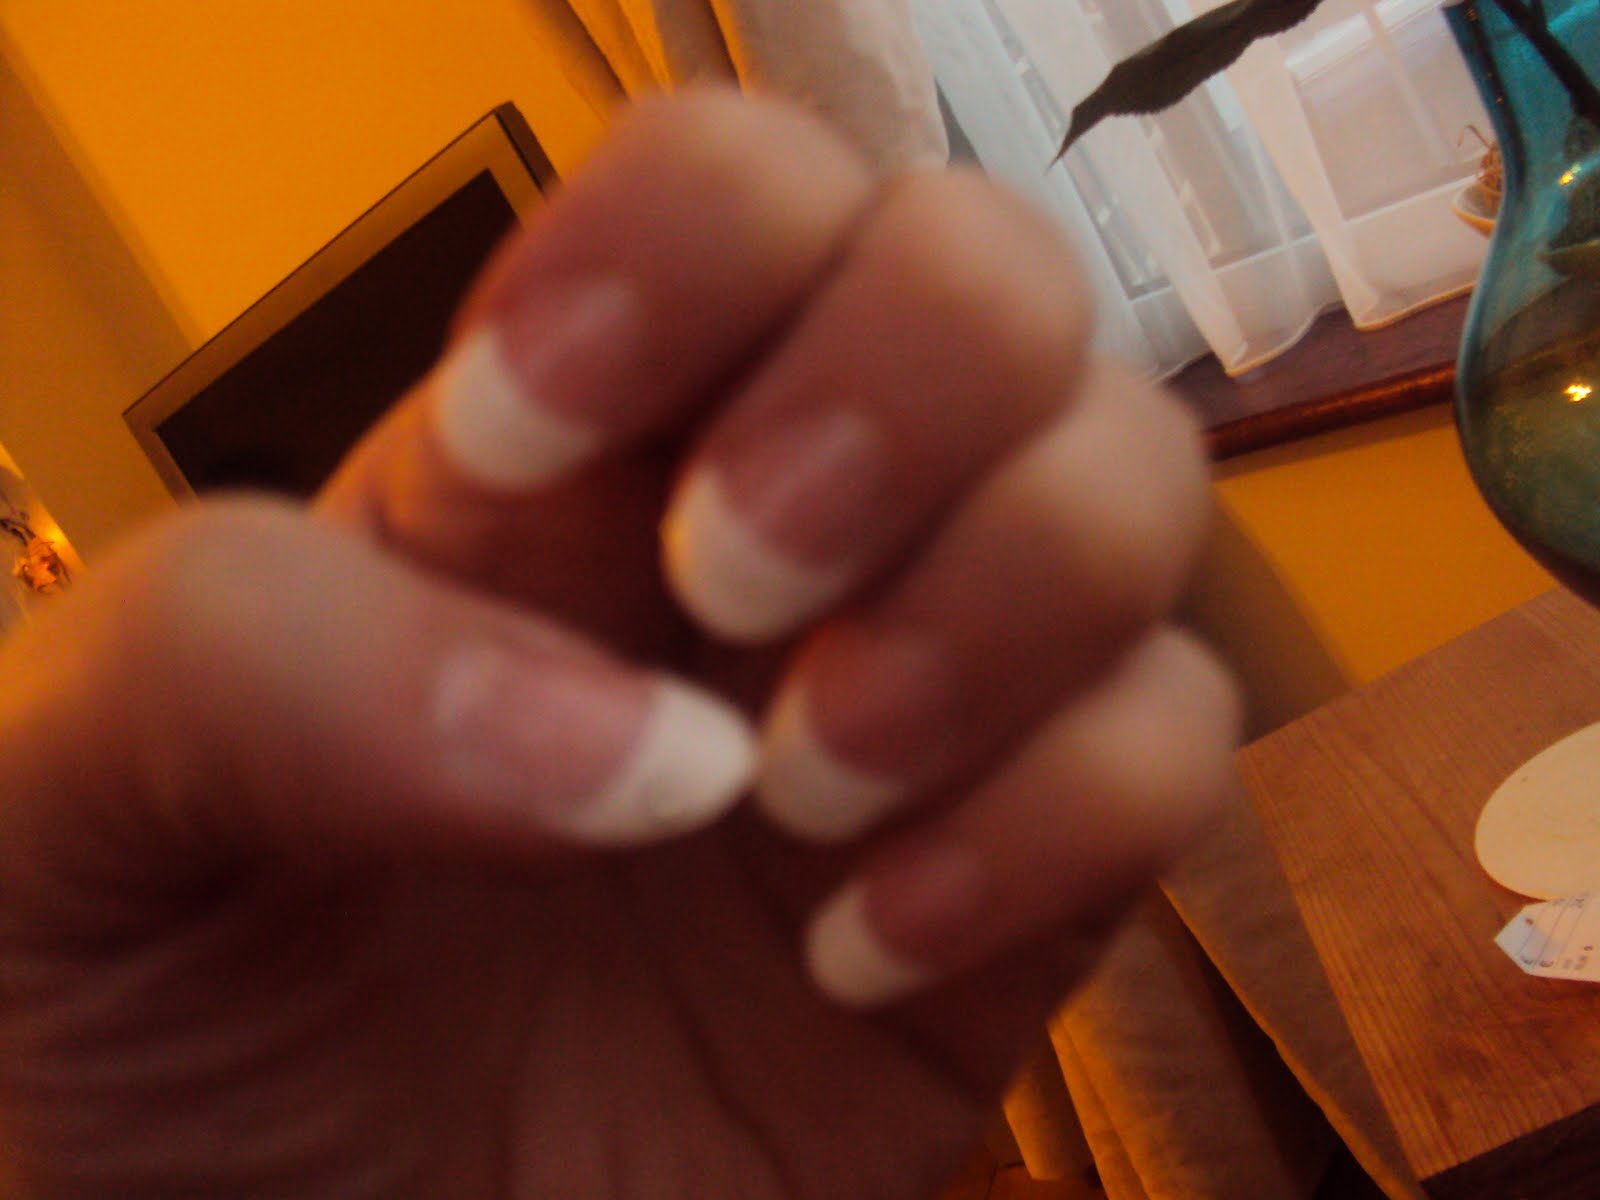 I also used the Broadway Gel nail kit and actually prefered that one,